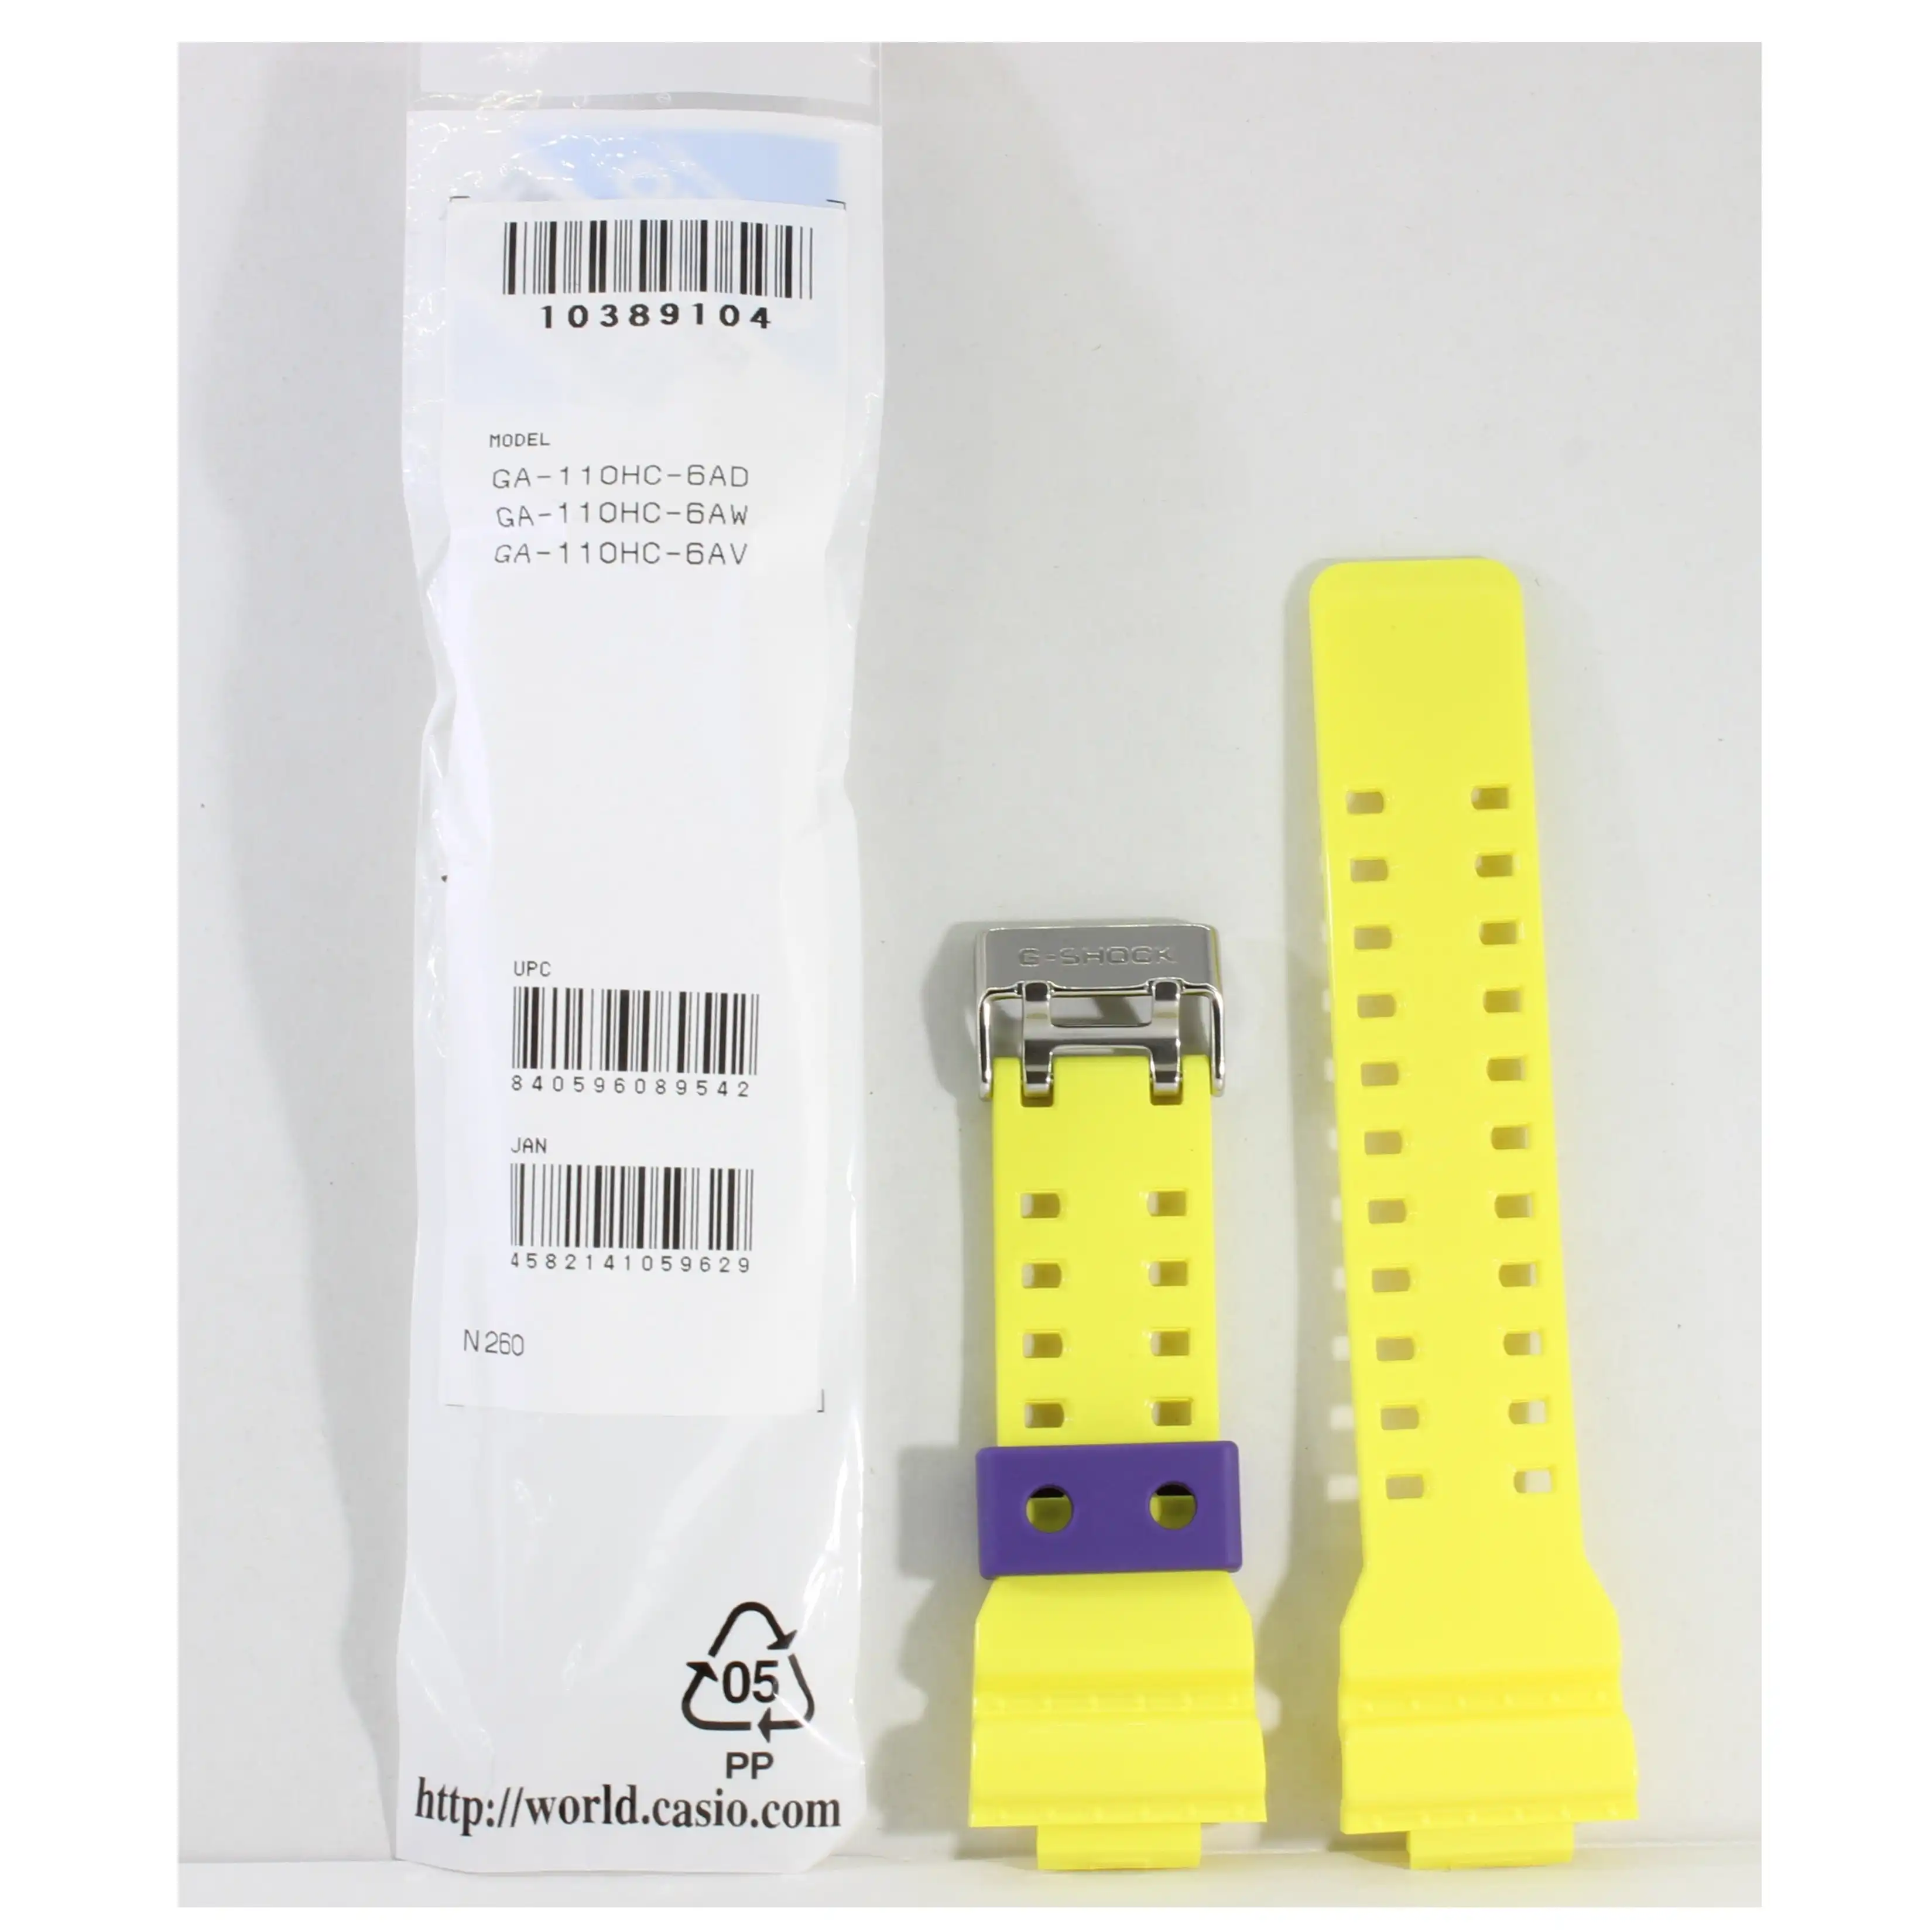 Casio G-Shock Shiny Yellow Genuine Replacement Strap 10389014 to suit GA-110HC-6A